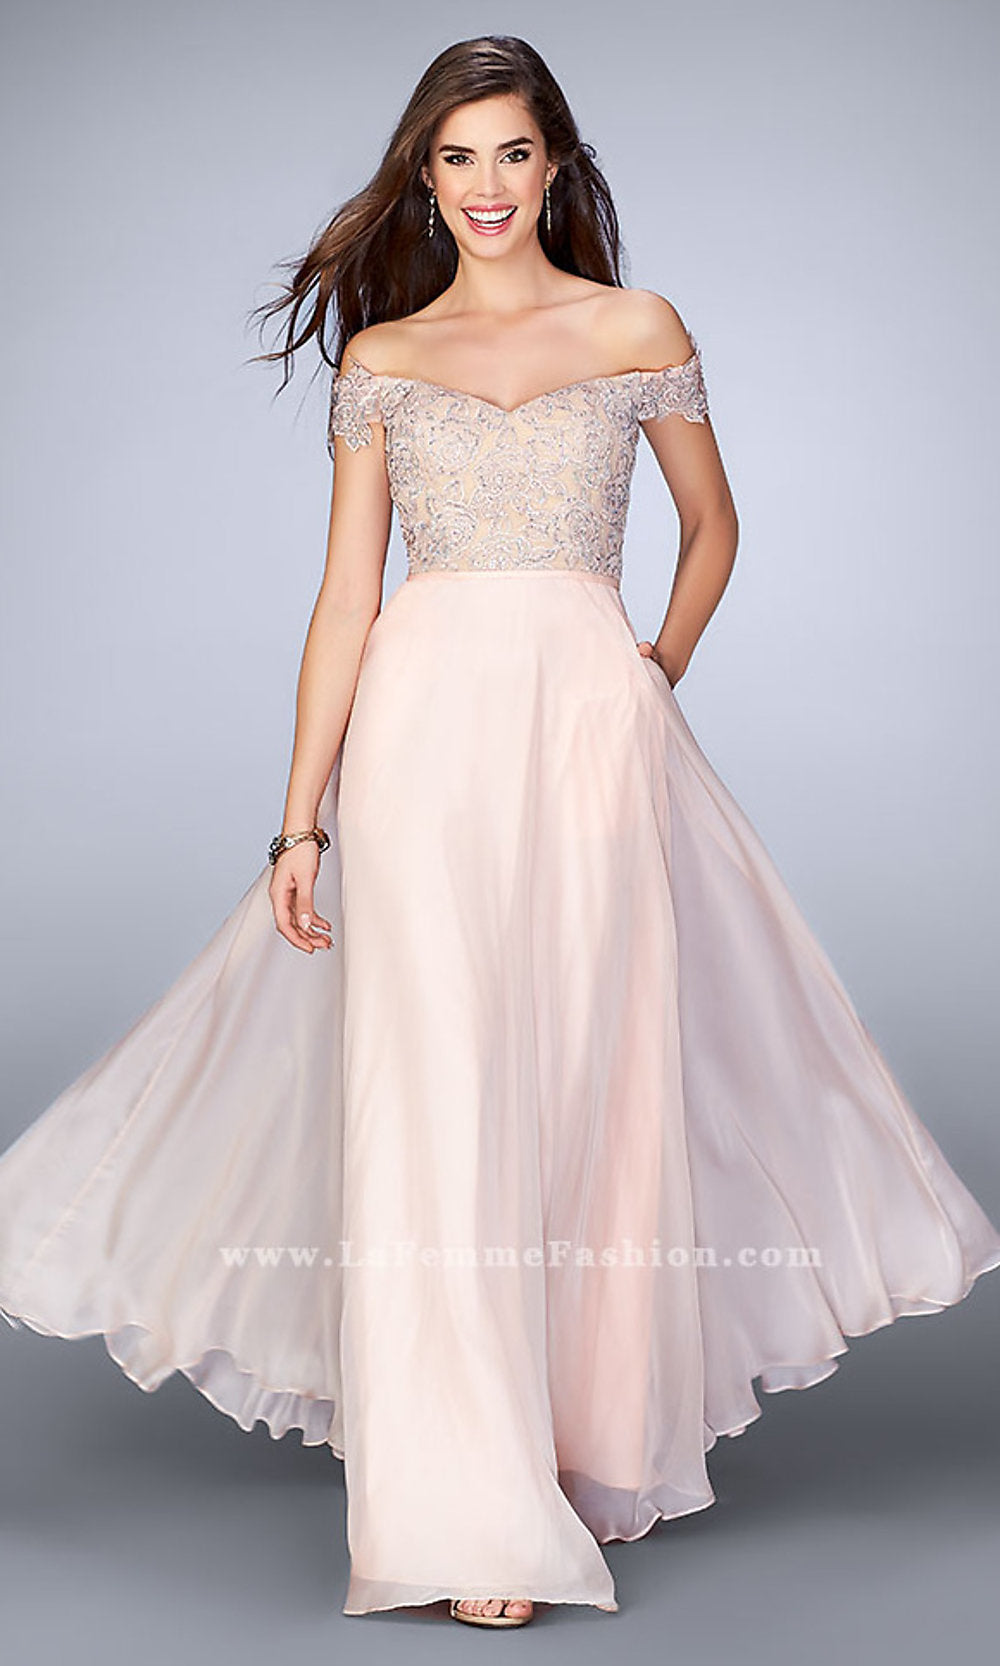 Blush Lace Off-the-Shoulder Long Prom Dress